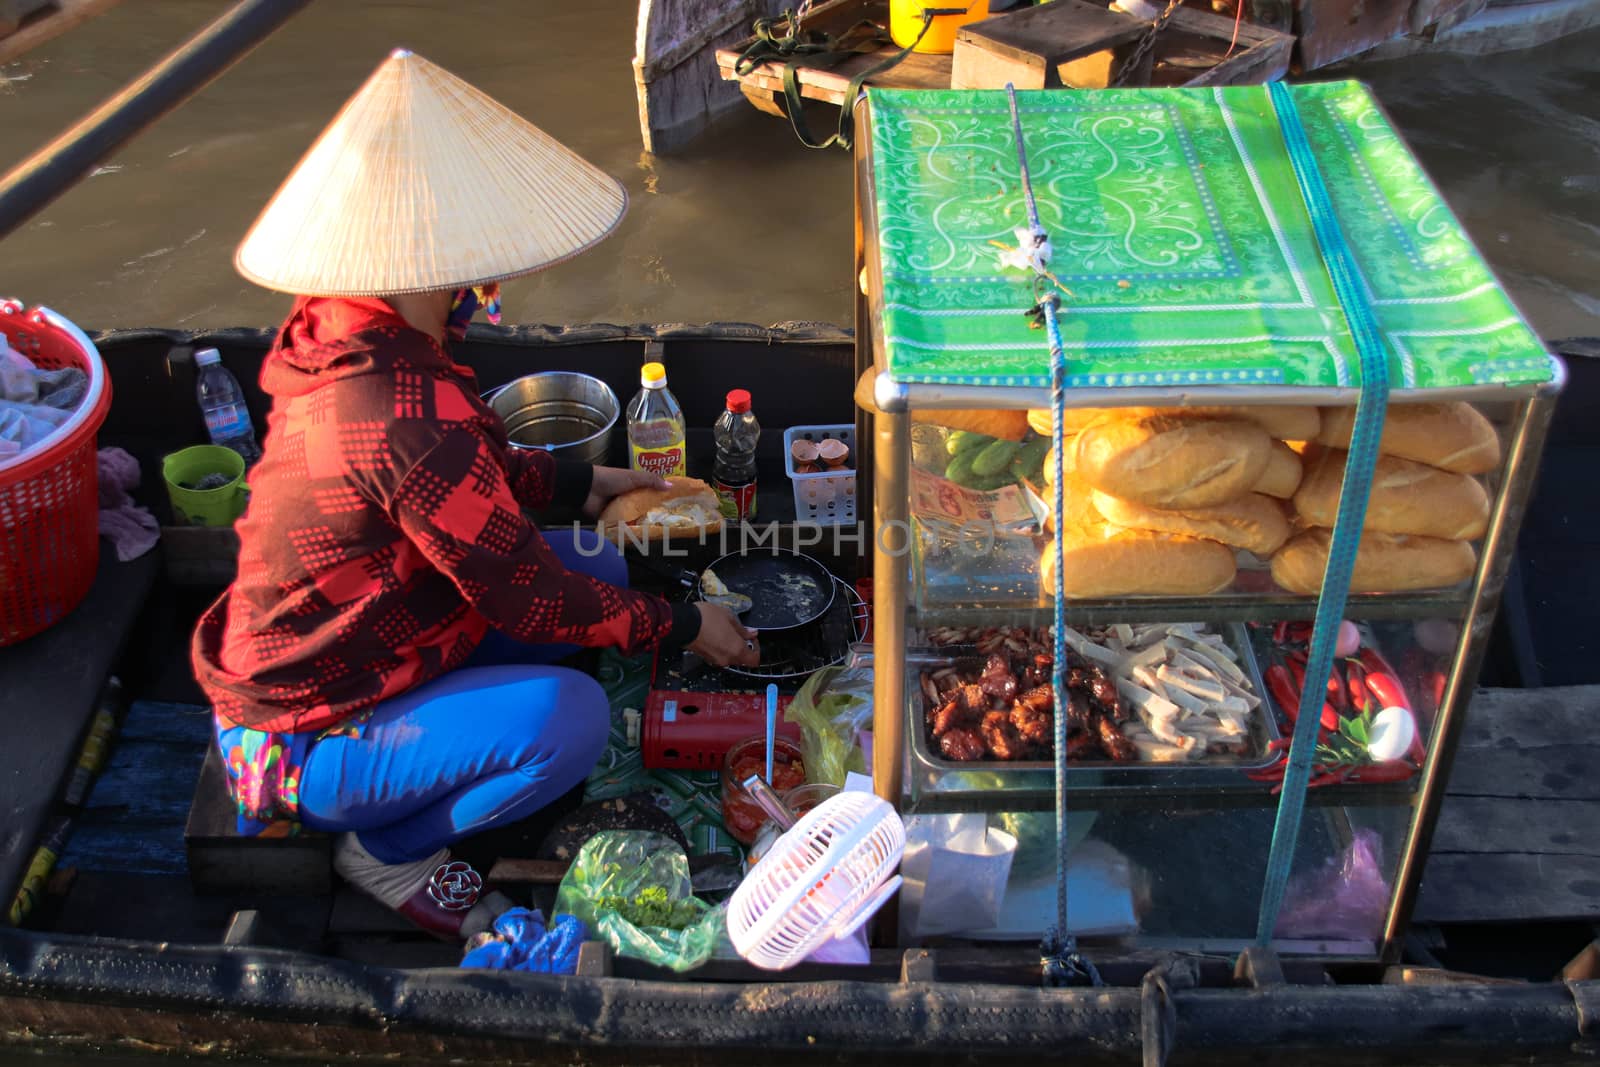 Everyday life in the famous Cai Rang Floating Market in Can tho, Vietnam